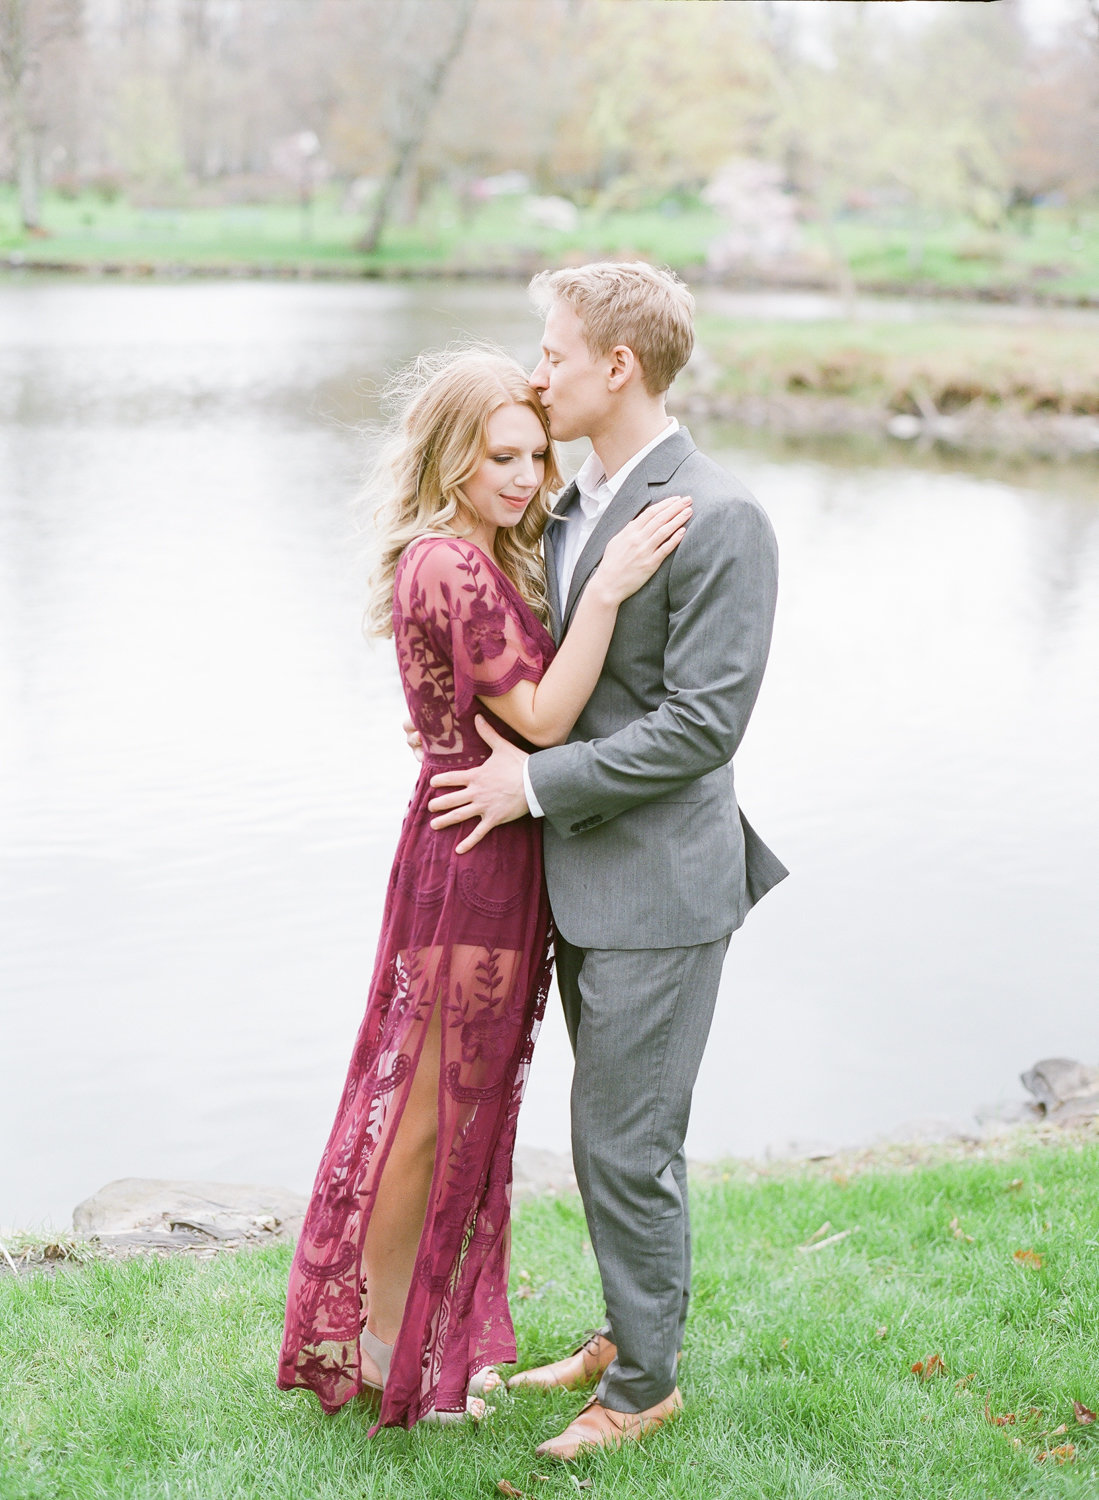 Jacqueline Anne Photography - Amanda and Brent-47